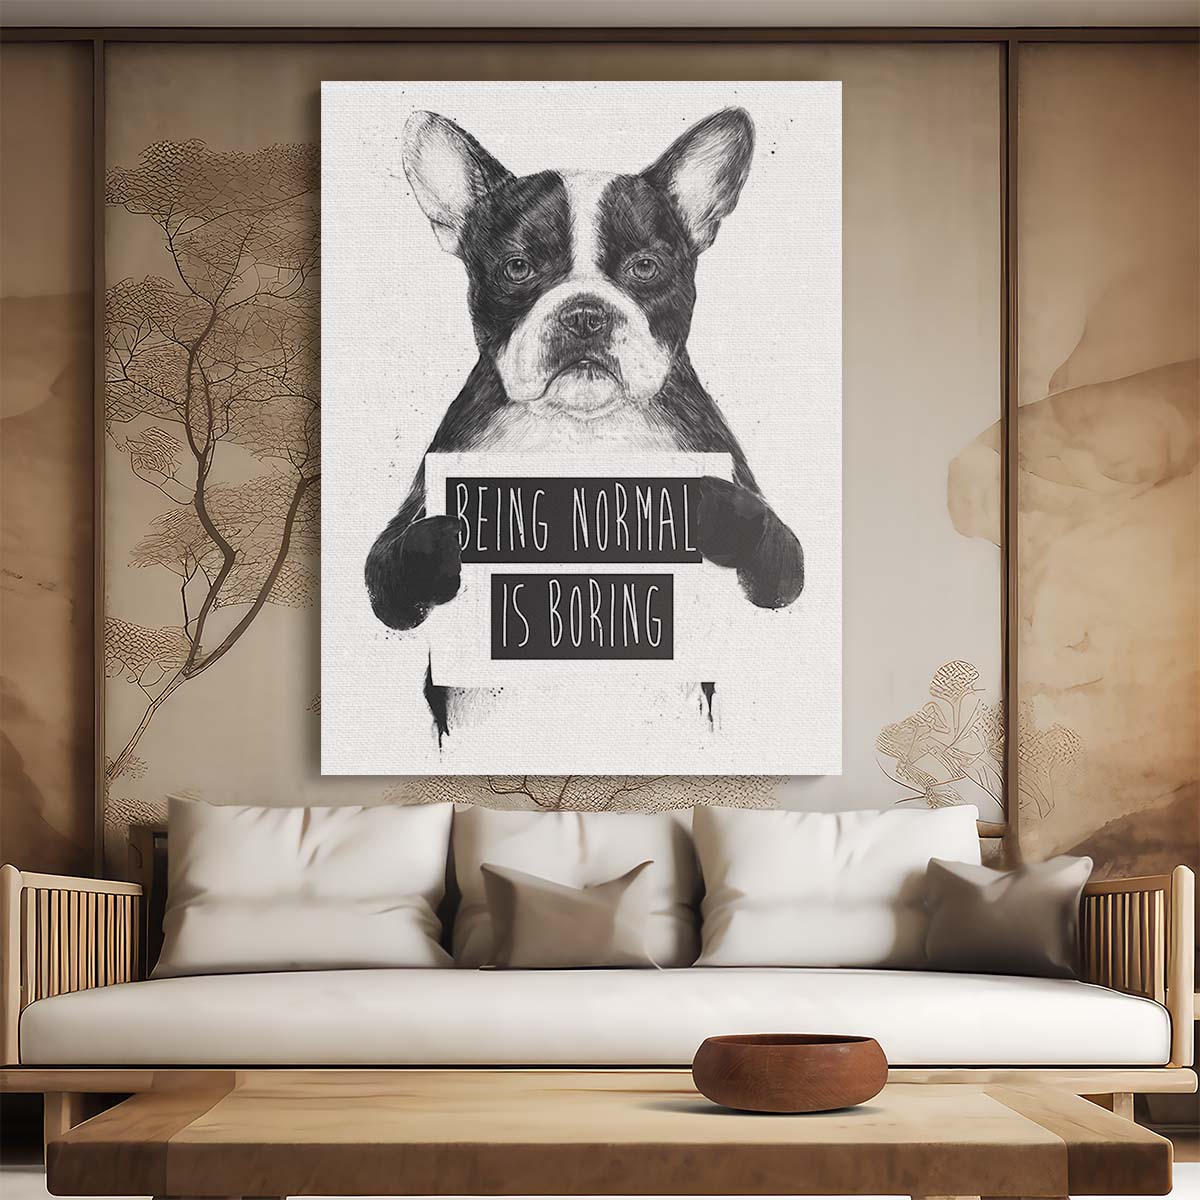 Frenchie Bulldog Motivational Quote Illustration Wall Art by Luxuriance Designs, made in USA